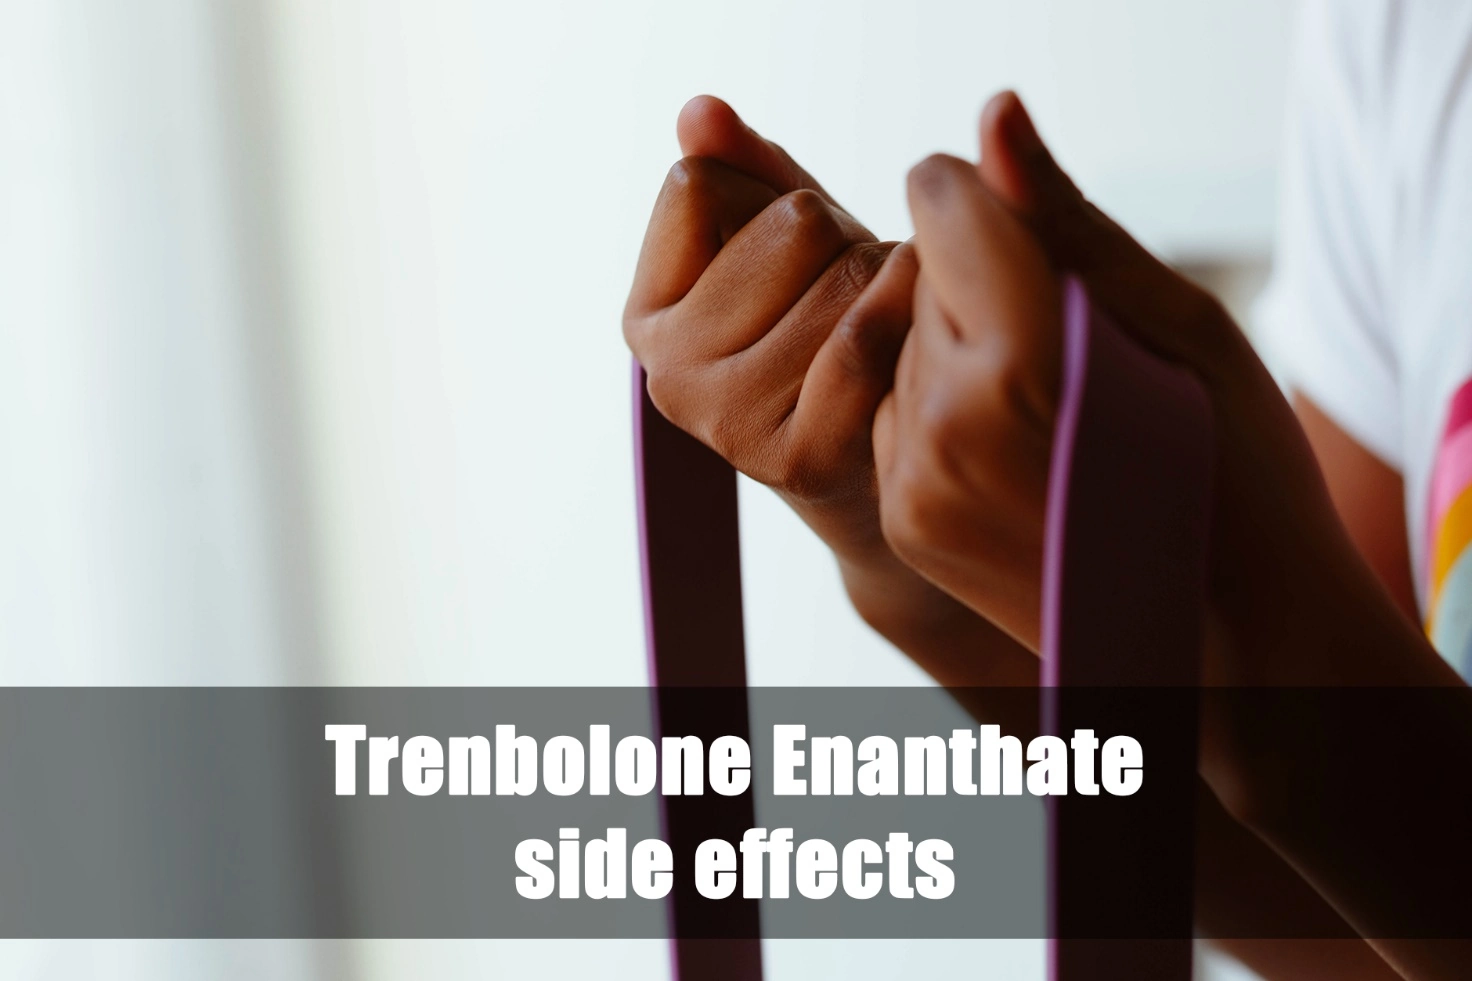 Trenbolone Enanthate side effects